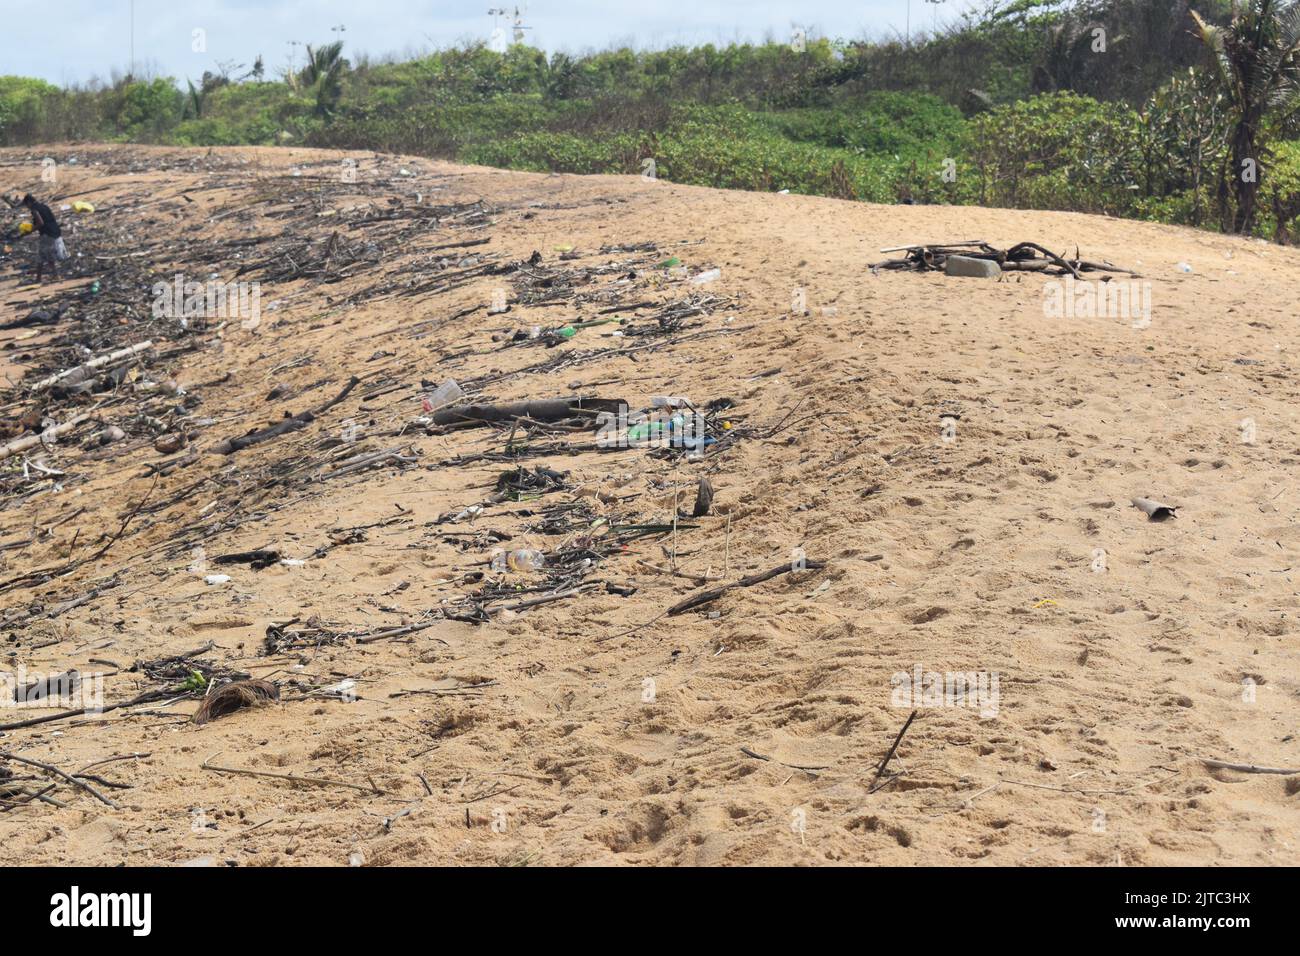 Wood and plastic wastage has washed ashore due to rough seas in the Indian ocean in the outskirts of Colombo. Sri Lanka. Stock Photo